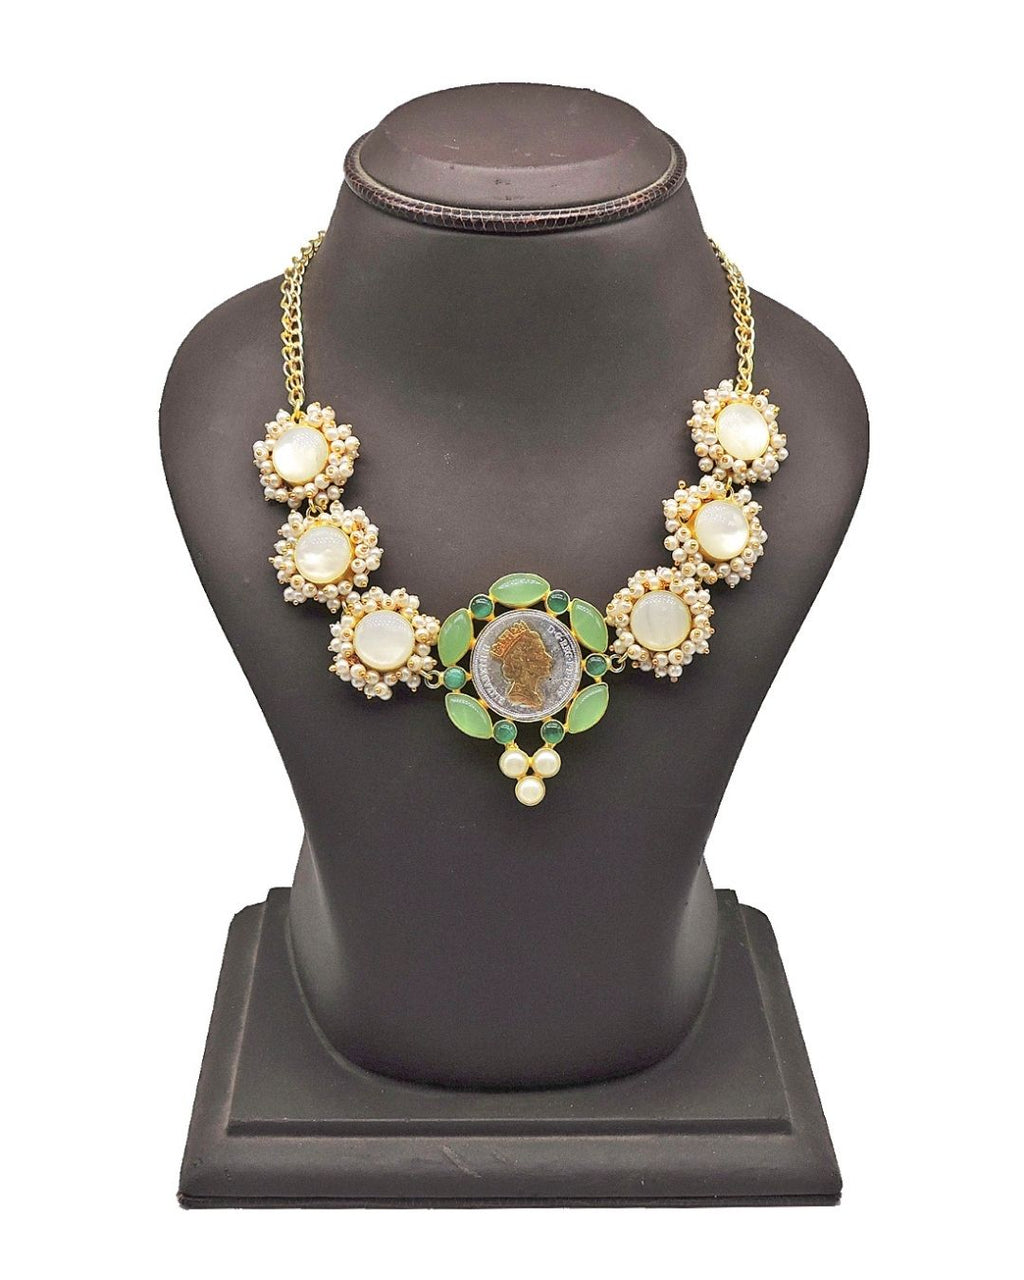 Oracle Gem Necklace in Forest - Necklaces - Handcrafted Jewellery - Made in India - Dubai Jewellery, Fashion & Lifestyle - Dori